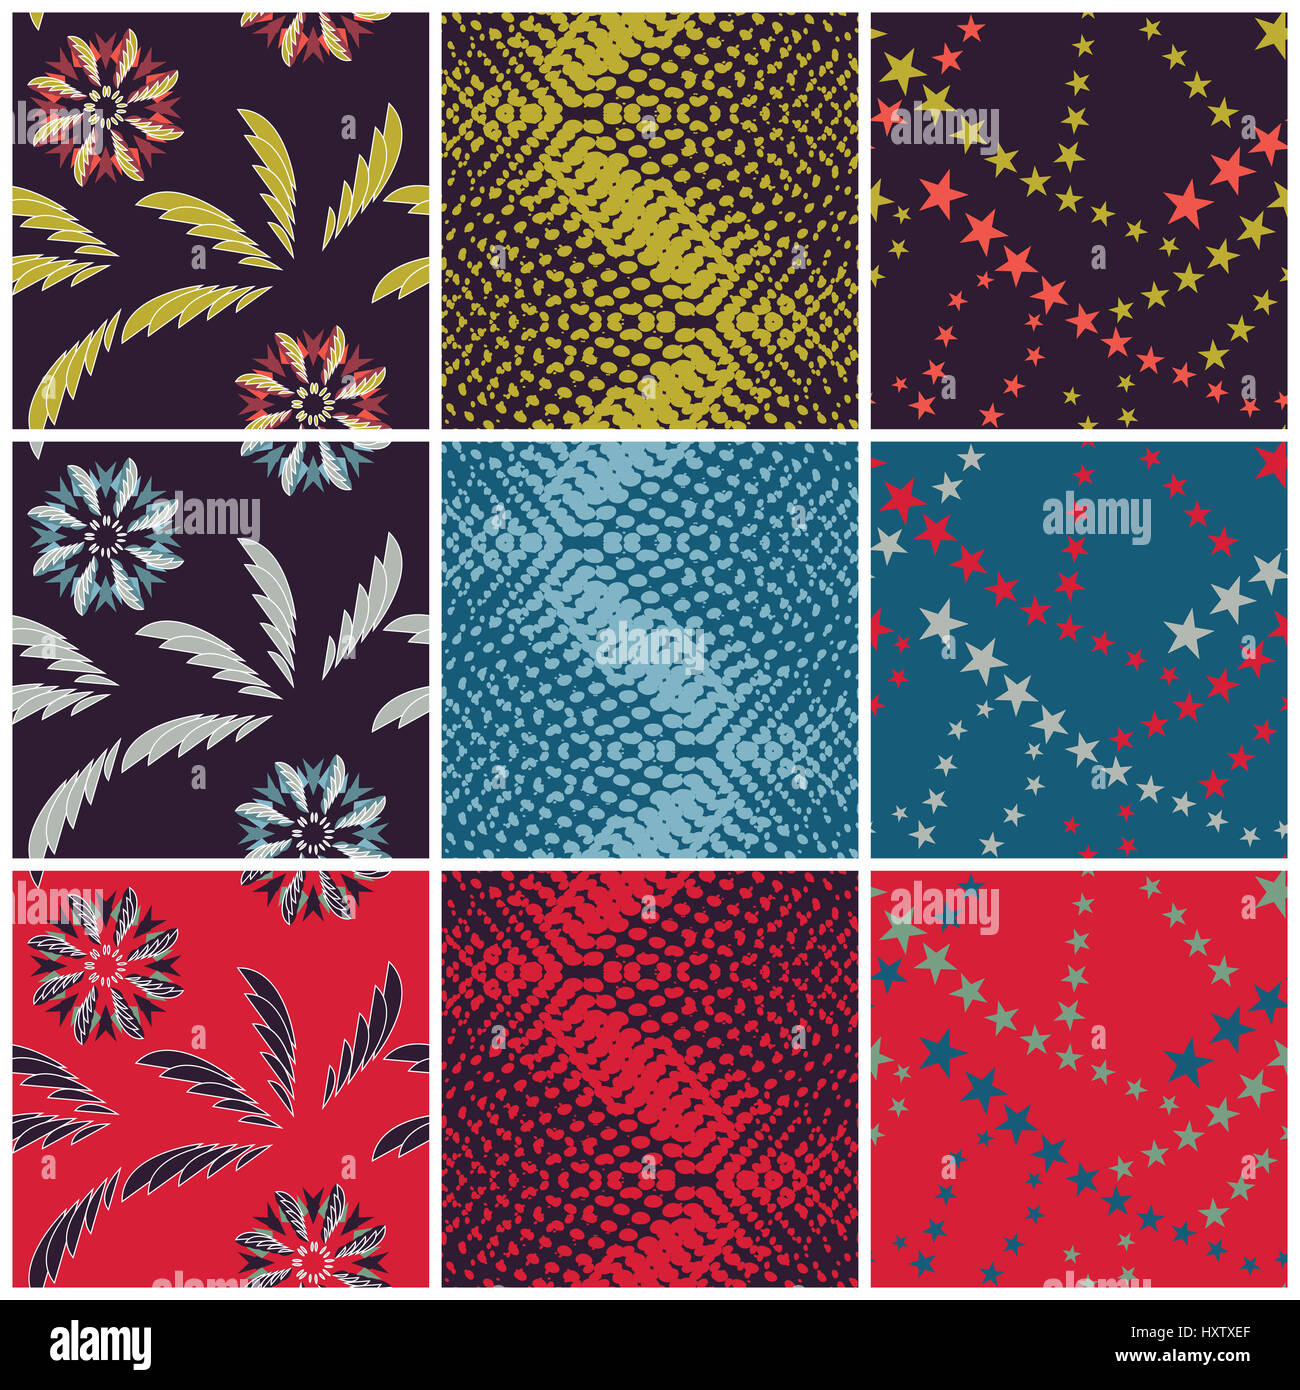 Collection Of 3 Matching Patterns In 3 Modern Colors Variations Stock Photo